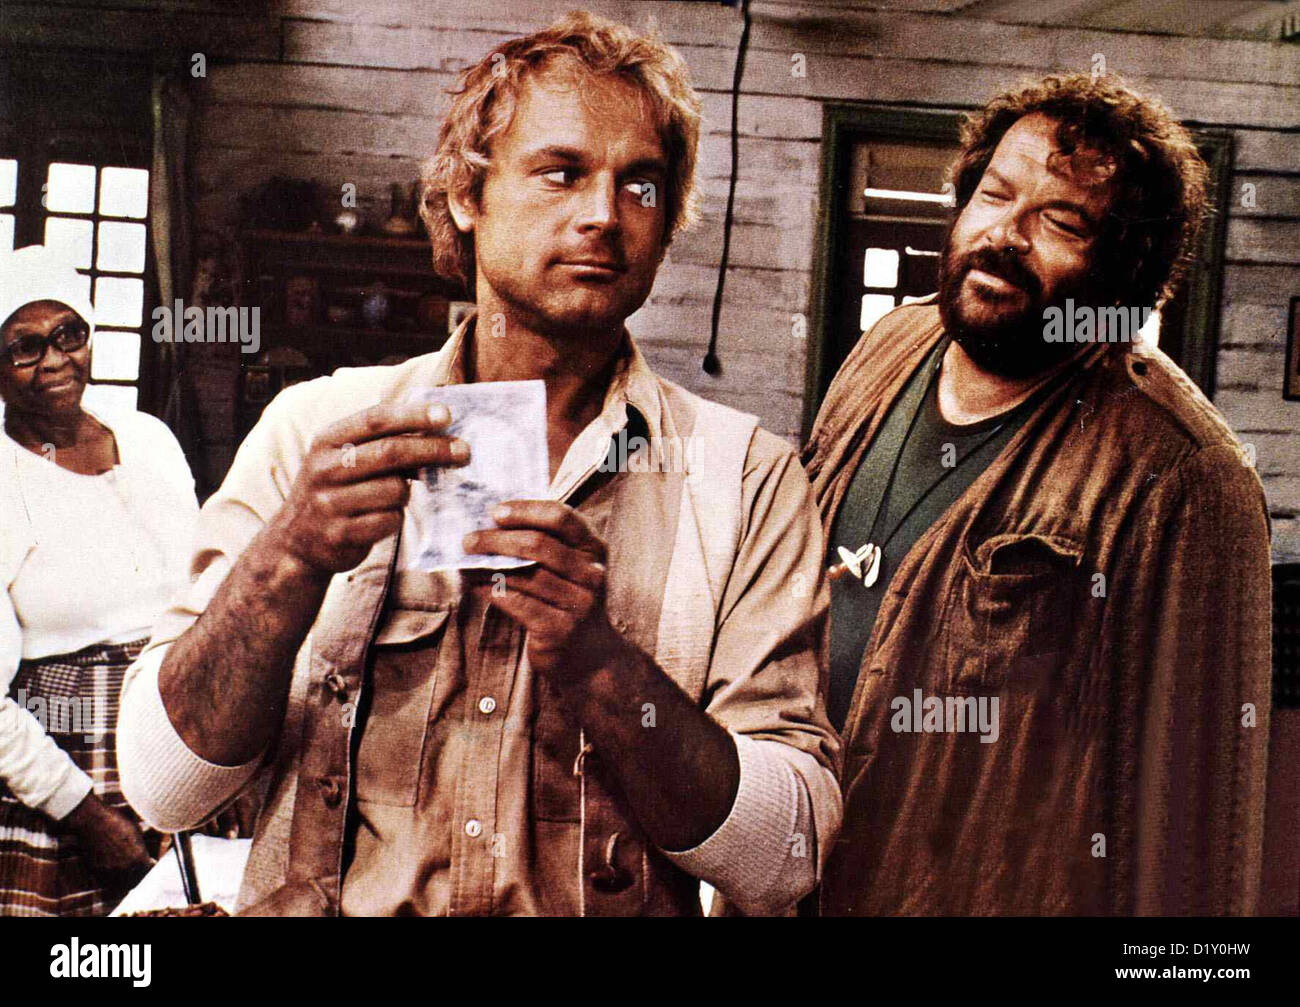 Die Troublemaker Troublemaker, Terence Hill, Bud Spencer Die ungleichen  Brueder Travis (Terence Hill,l) und Moses (Bud Stock Photo - Alamy